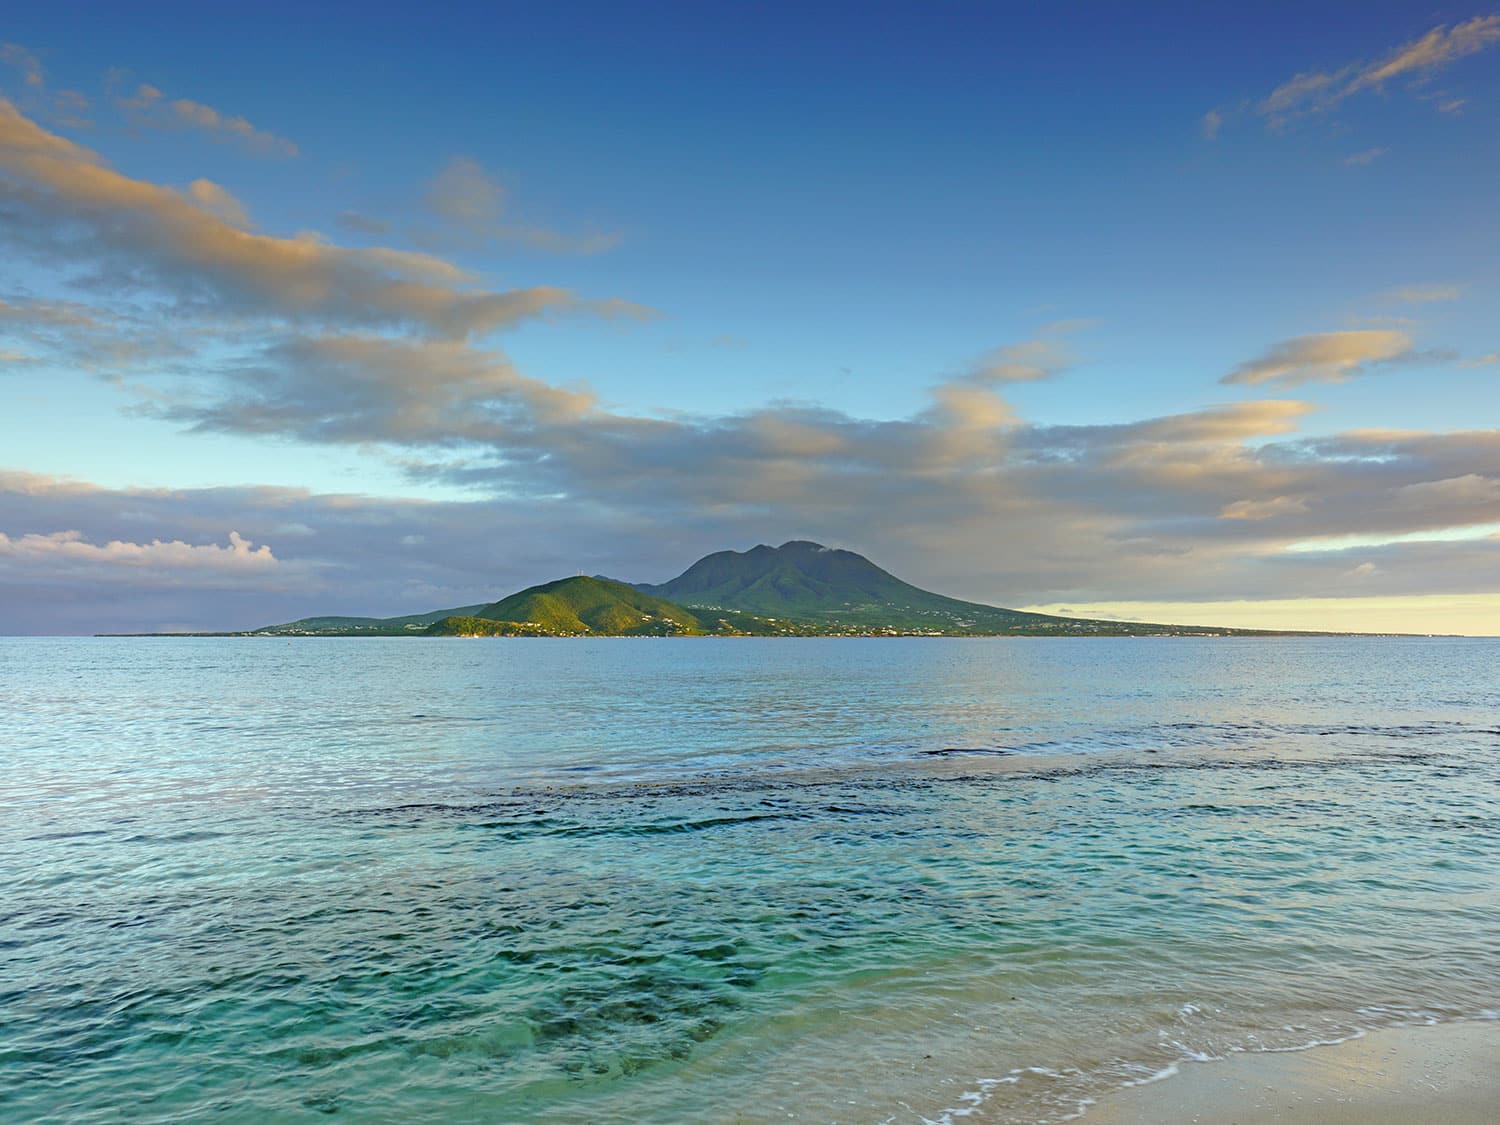 the view of the ocean and lush islands off the beach of Nevis.